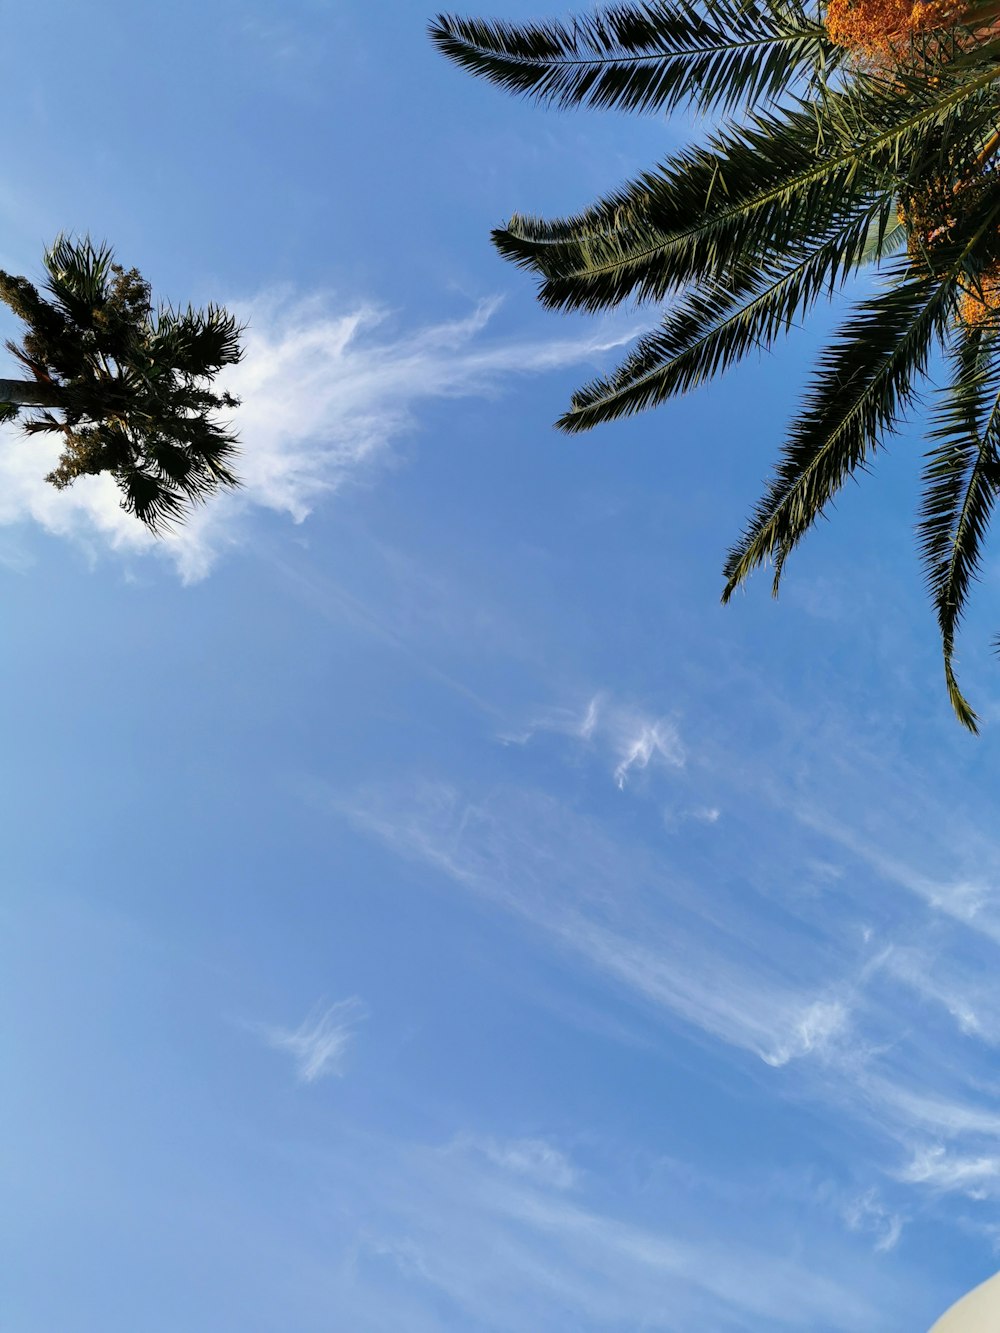 two palm trees against a blue sky with wispy clouds